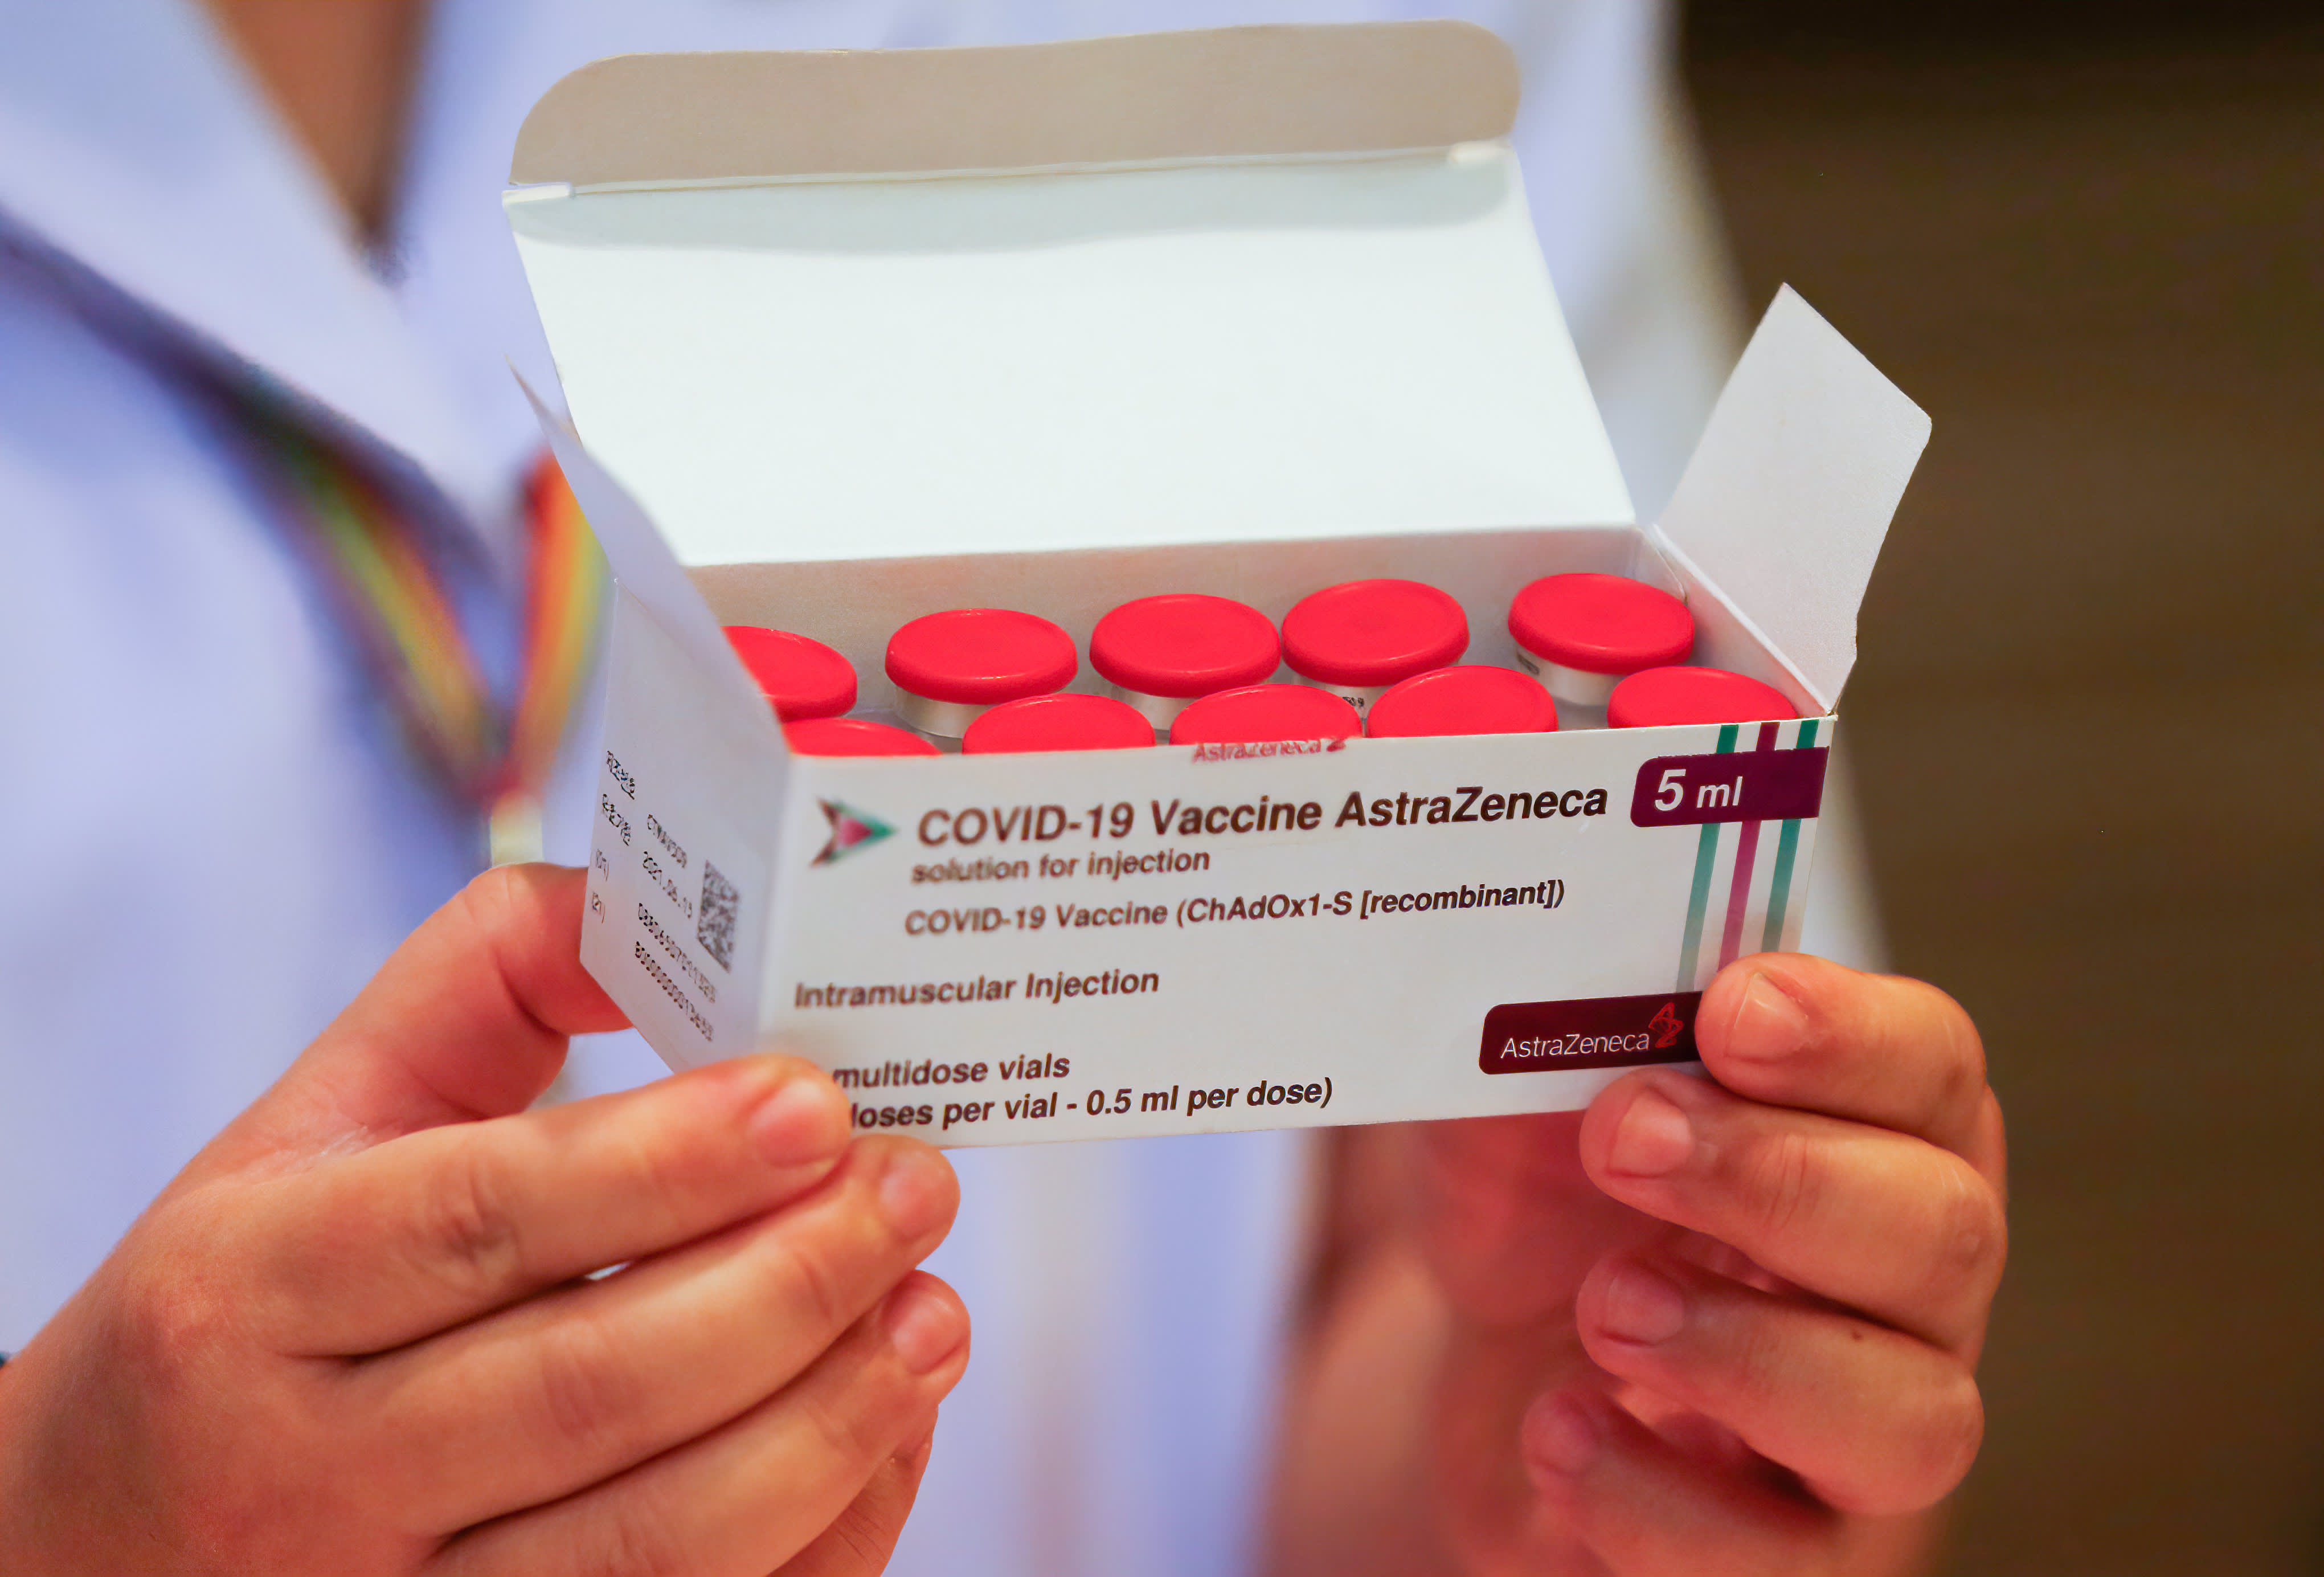 AstraZeneca Covid vaccine suspended in some countries due to fears of blood clots